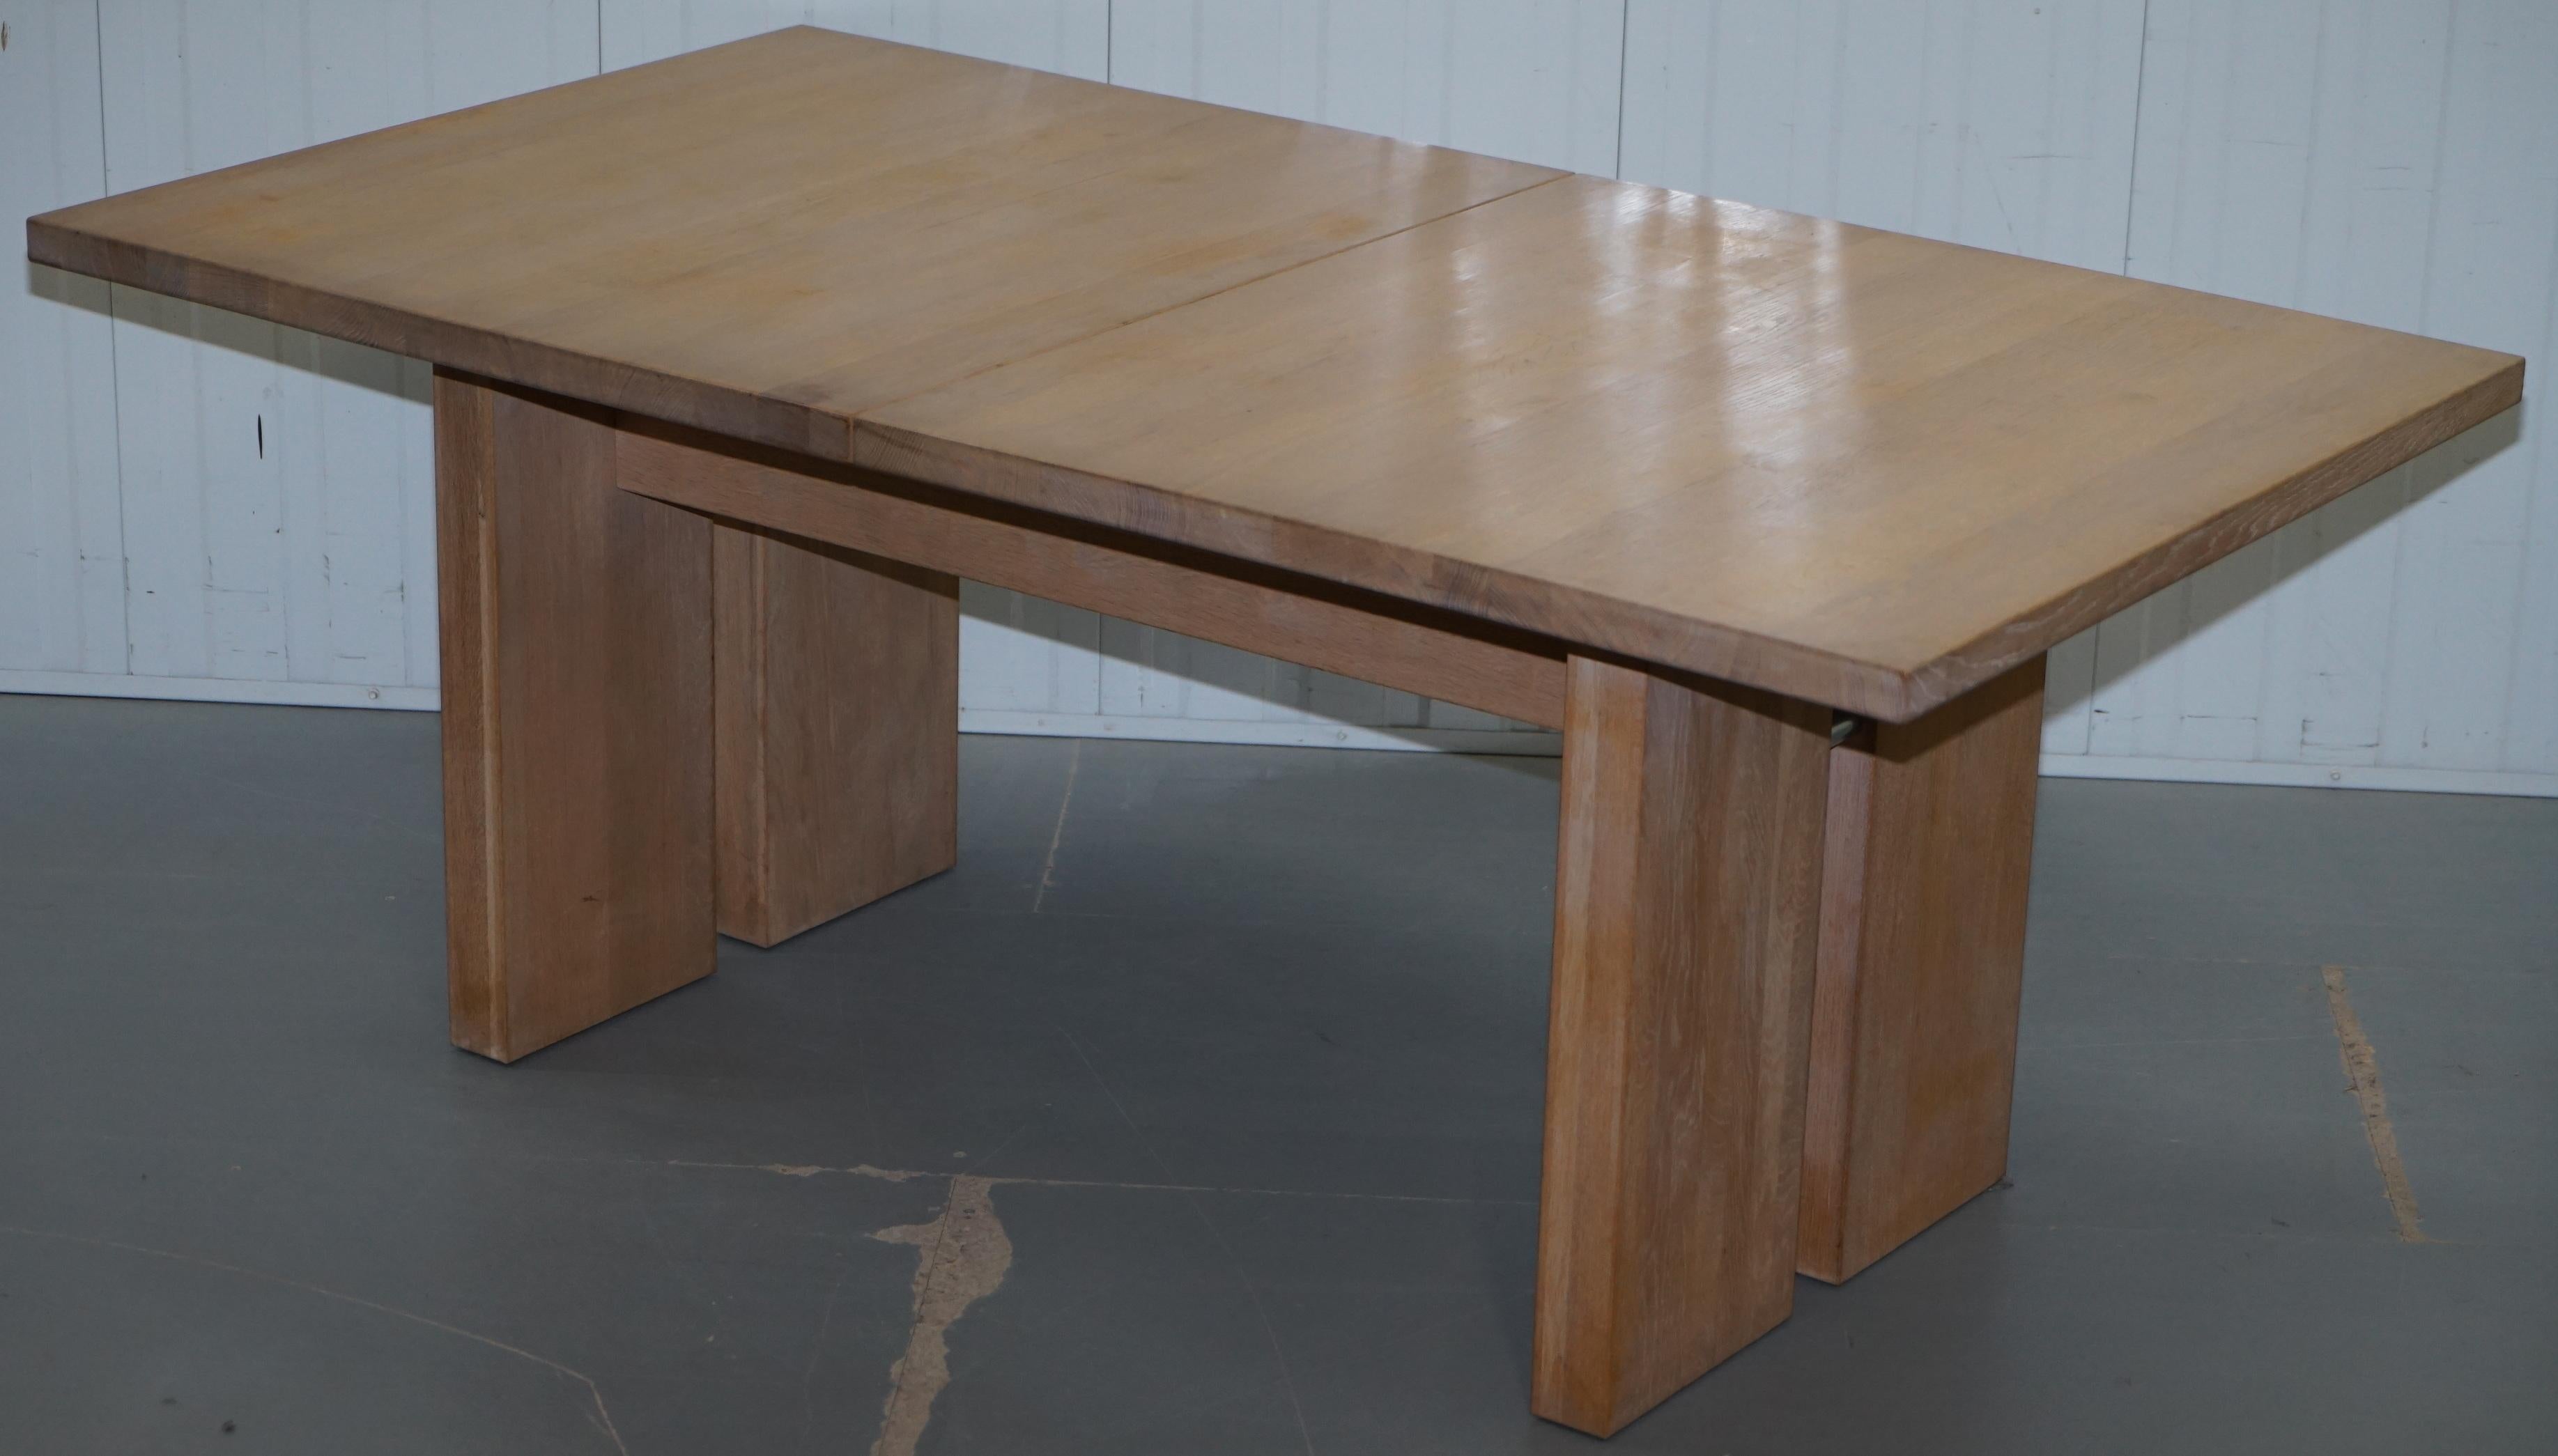 We are delighted to offer for sale this original Orum Mobler solid Ash dining table

Please note the delivery fee listed is just a guide

This table is part of a suite, I have the matching set of eight dining chairs, the bookcase and sideboard,